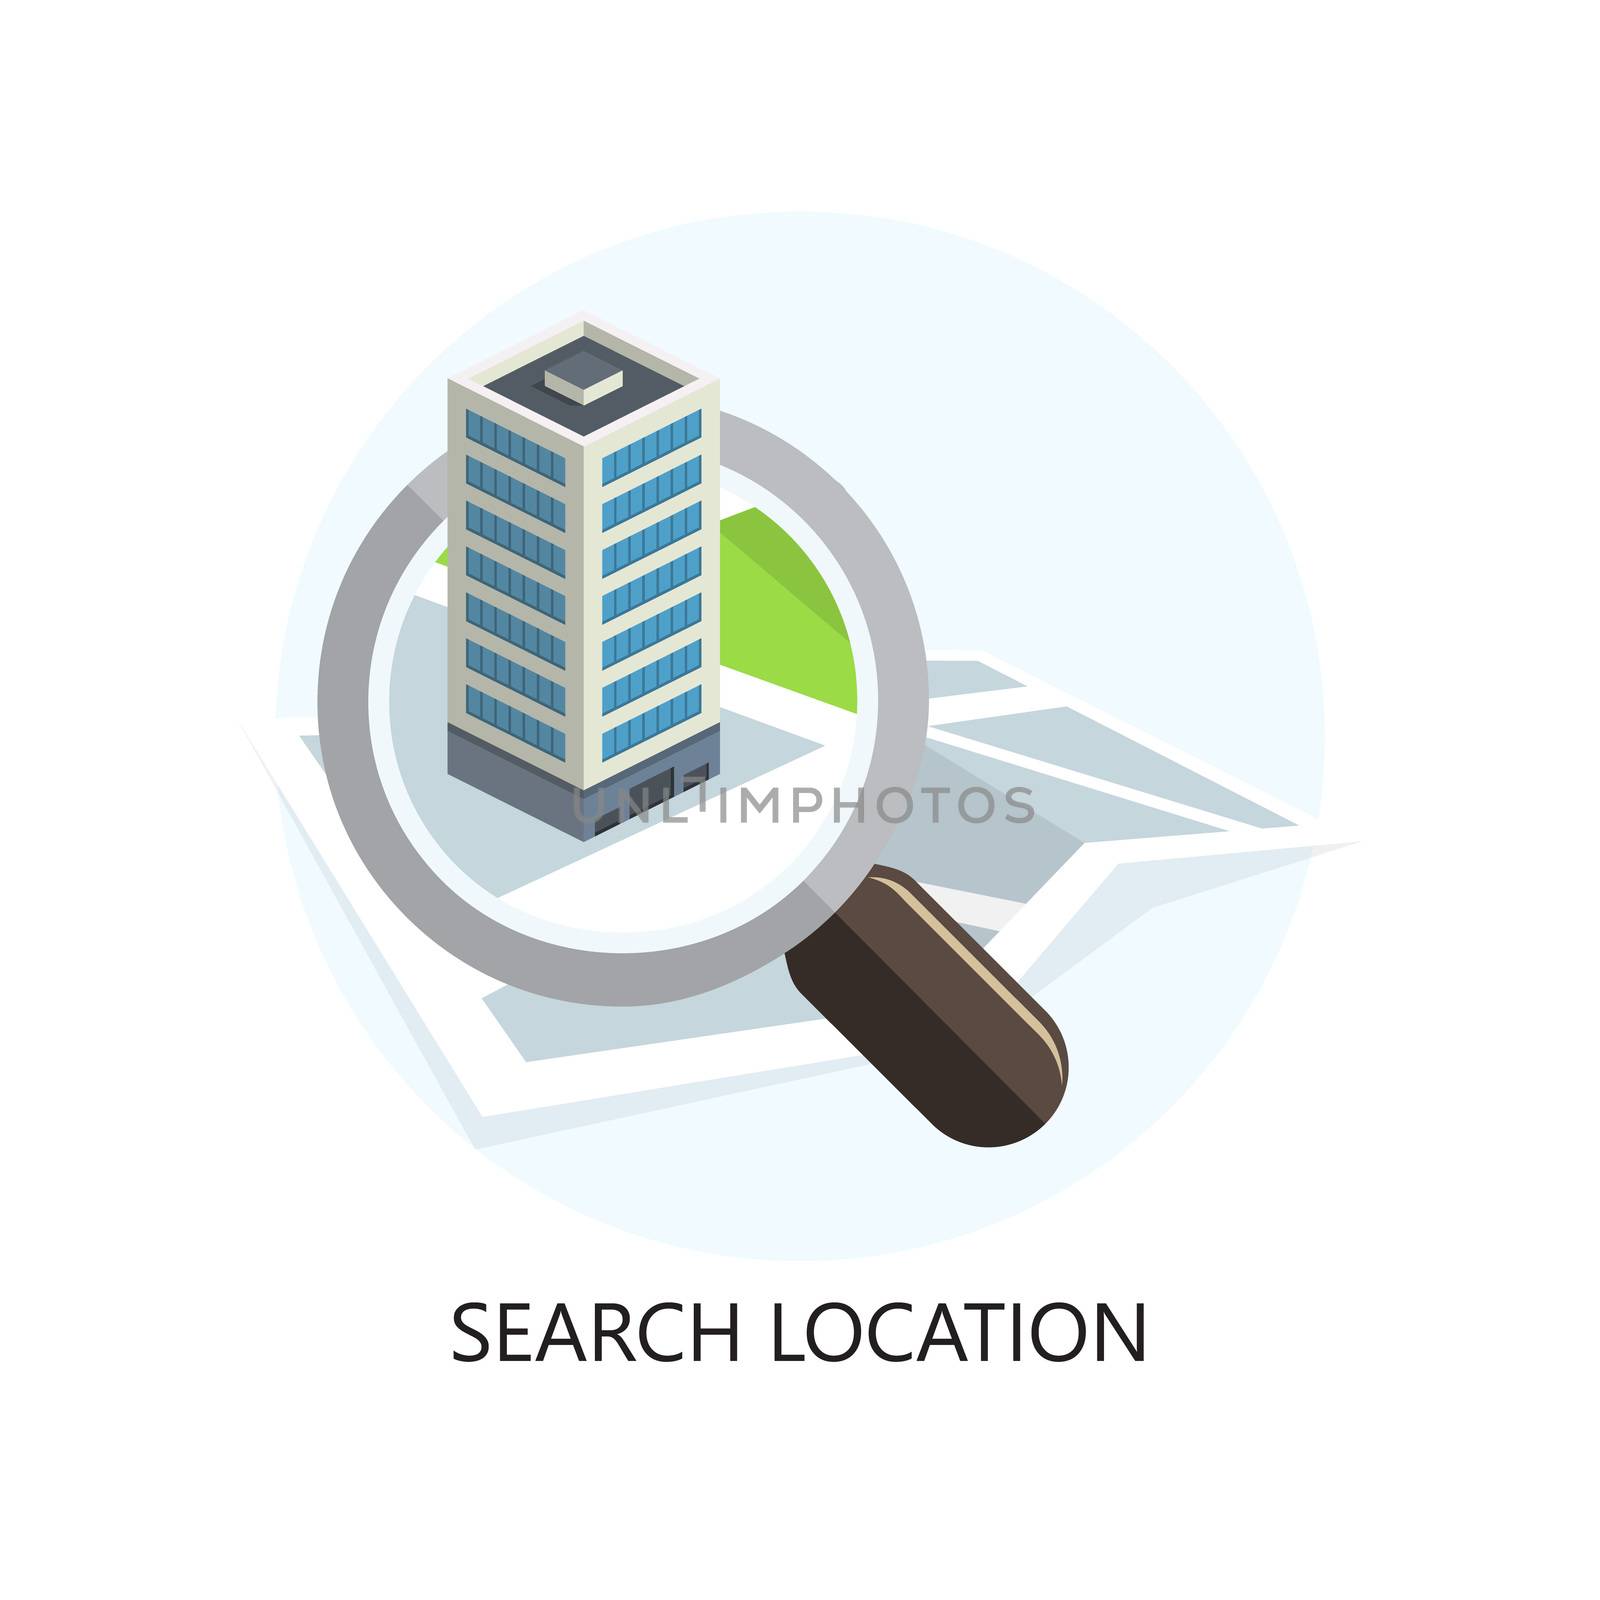 Location Icon. Search Concept. Flat Design. by WaD